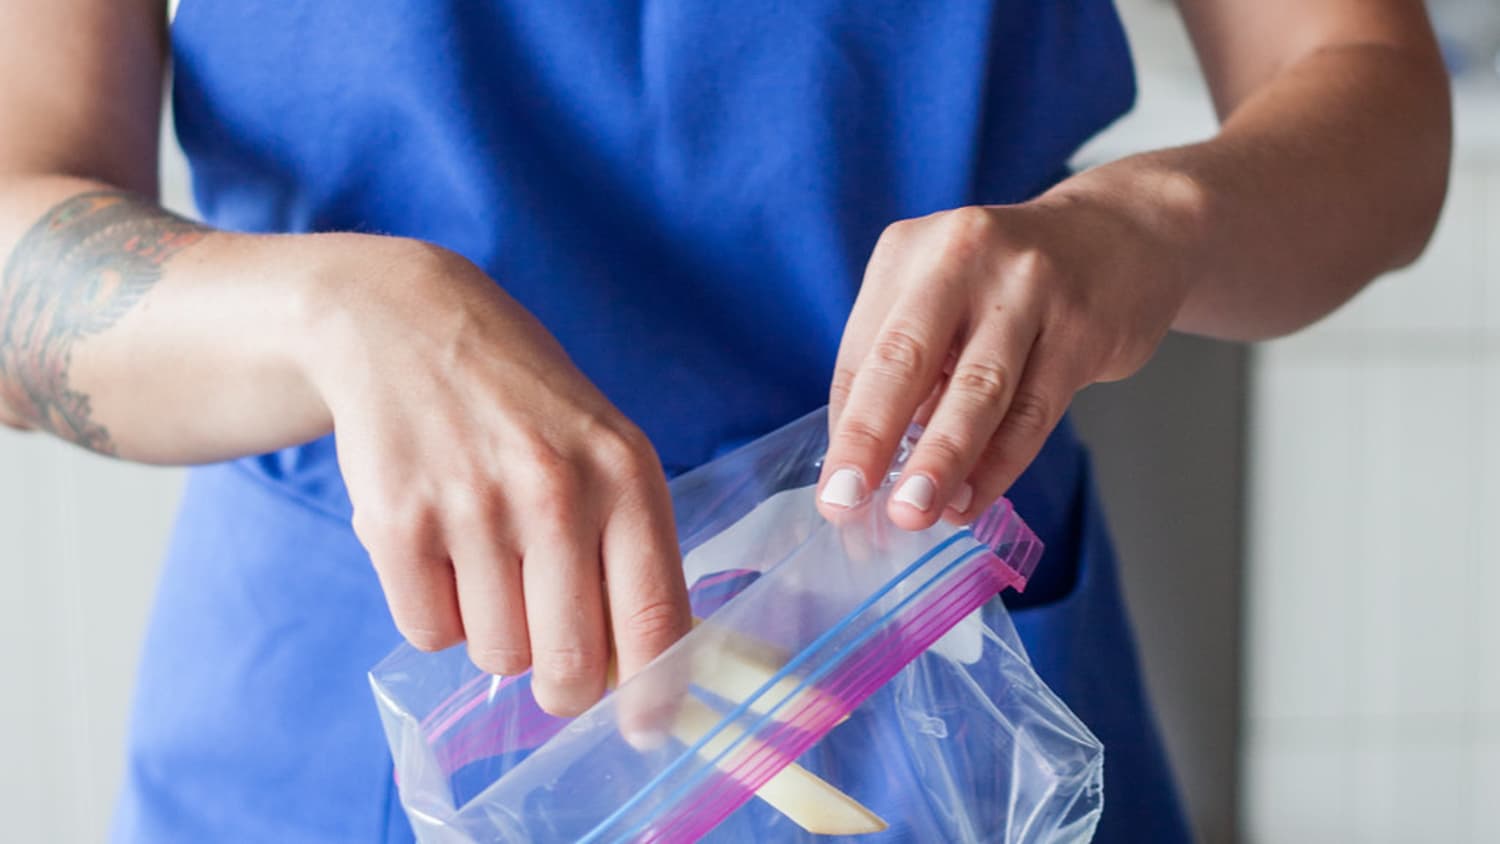 Freeze your own treats in these plastic zipper bags - The Gadgeteer